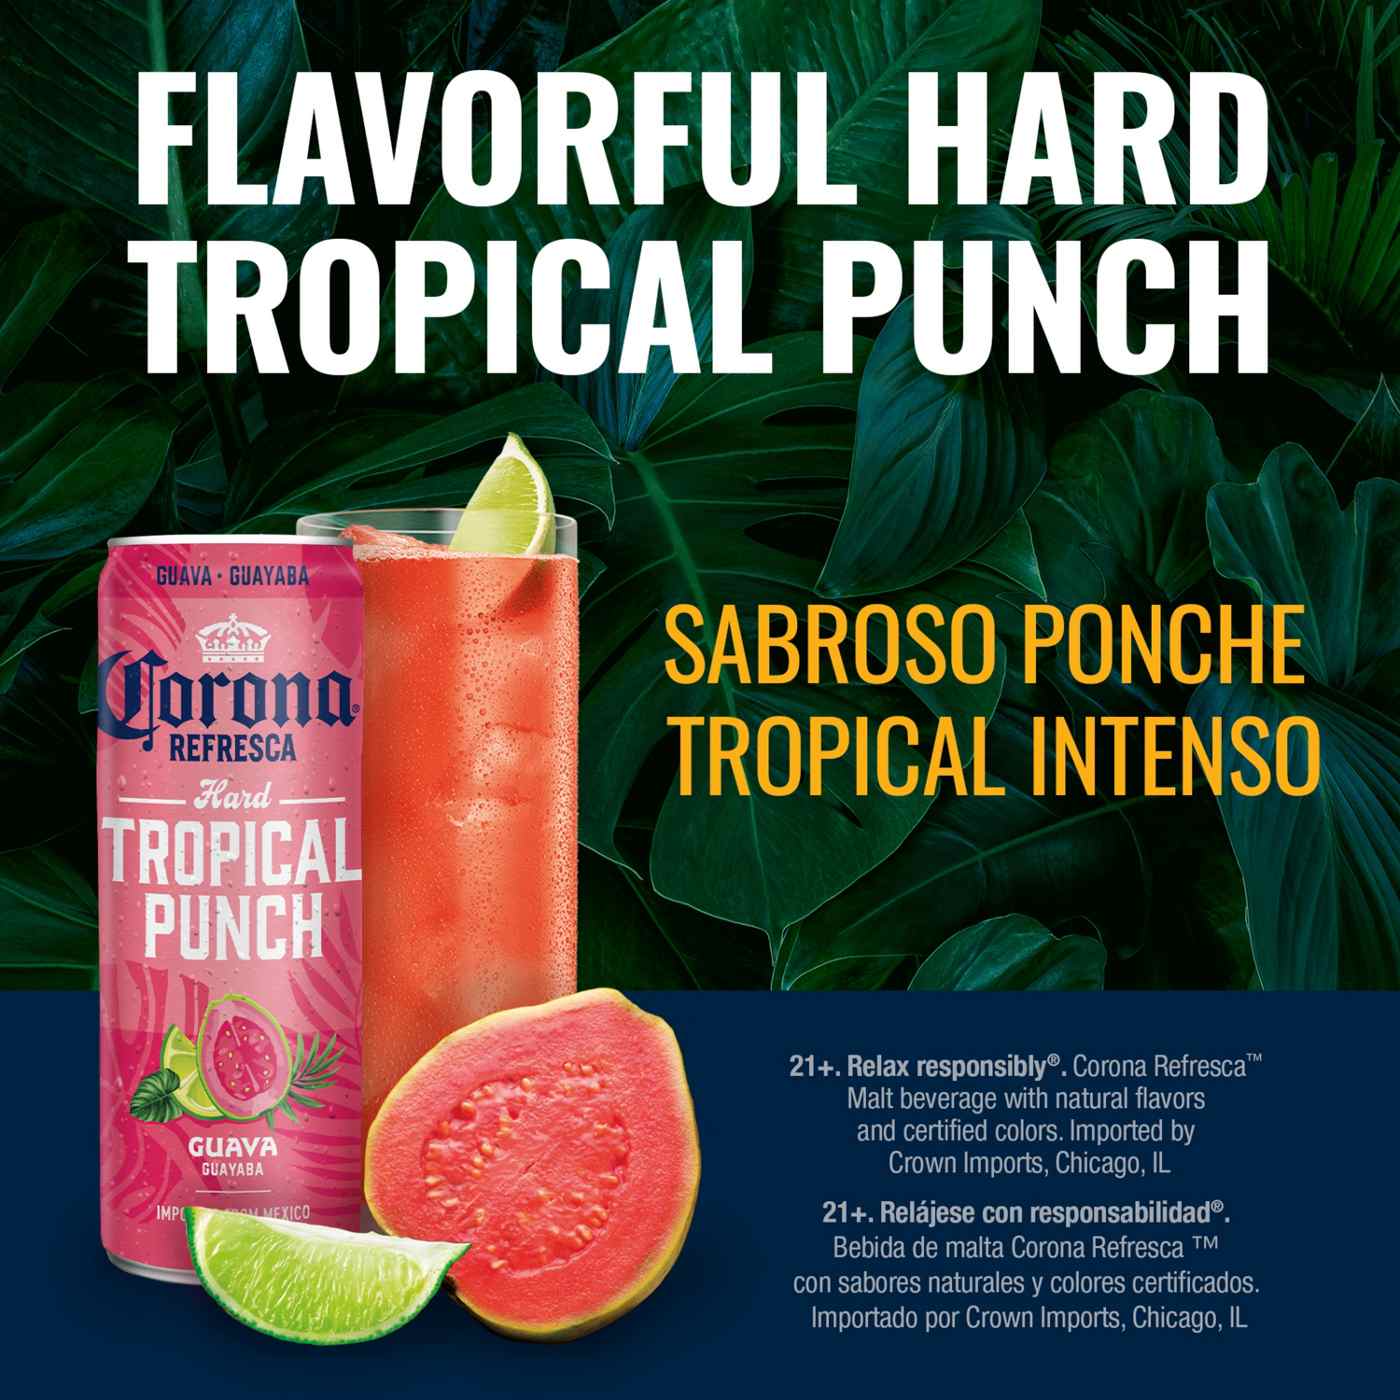 Corona Refresca Hard Tropical Punch Variety Pack 12 oz Cans, 12 pk; image 9 of 10